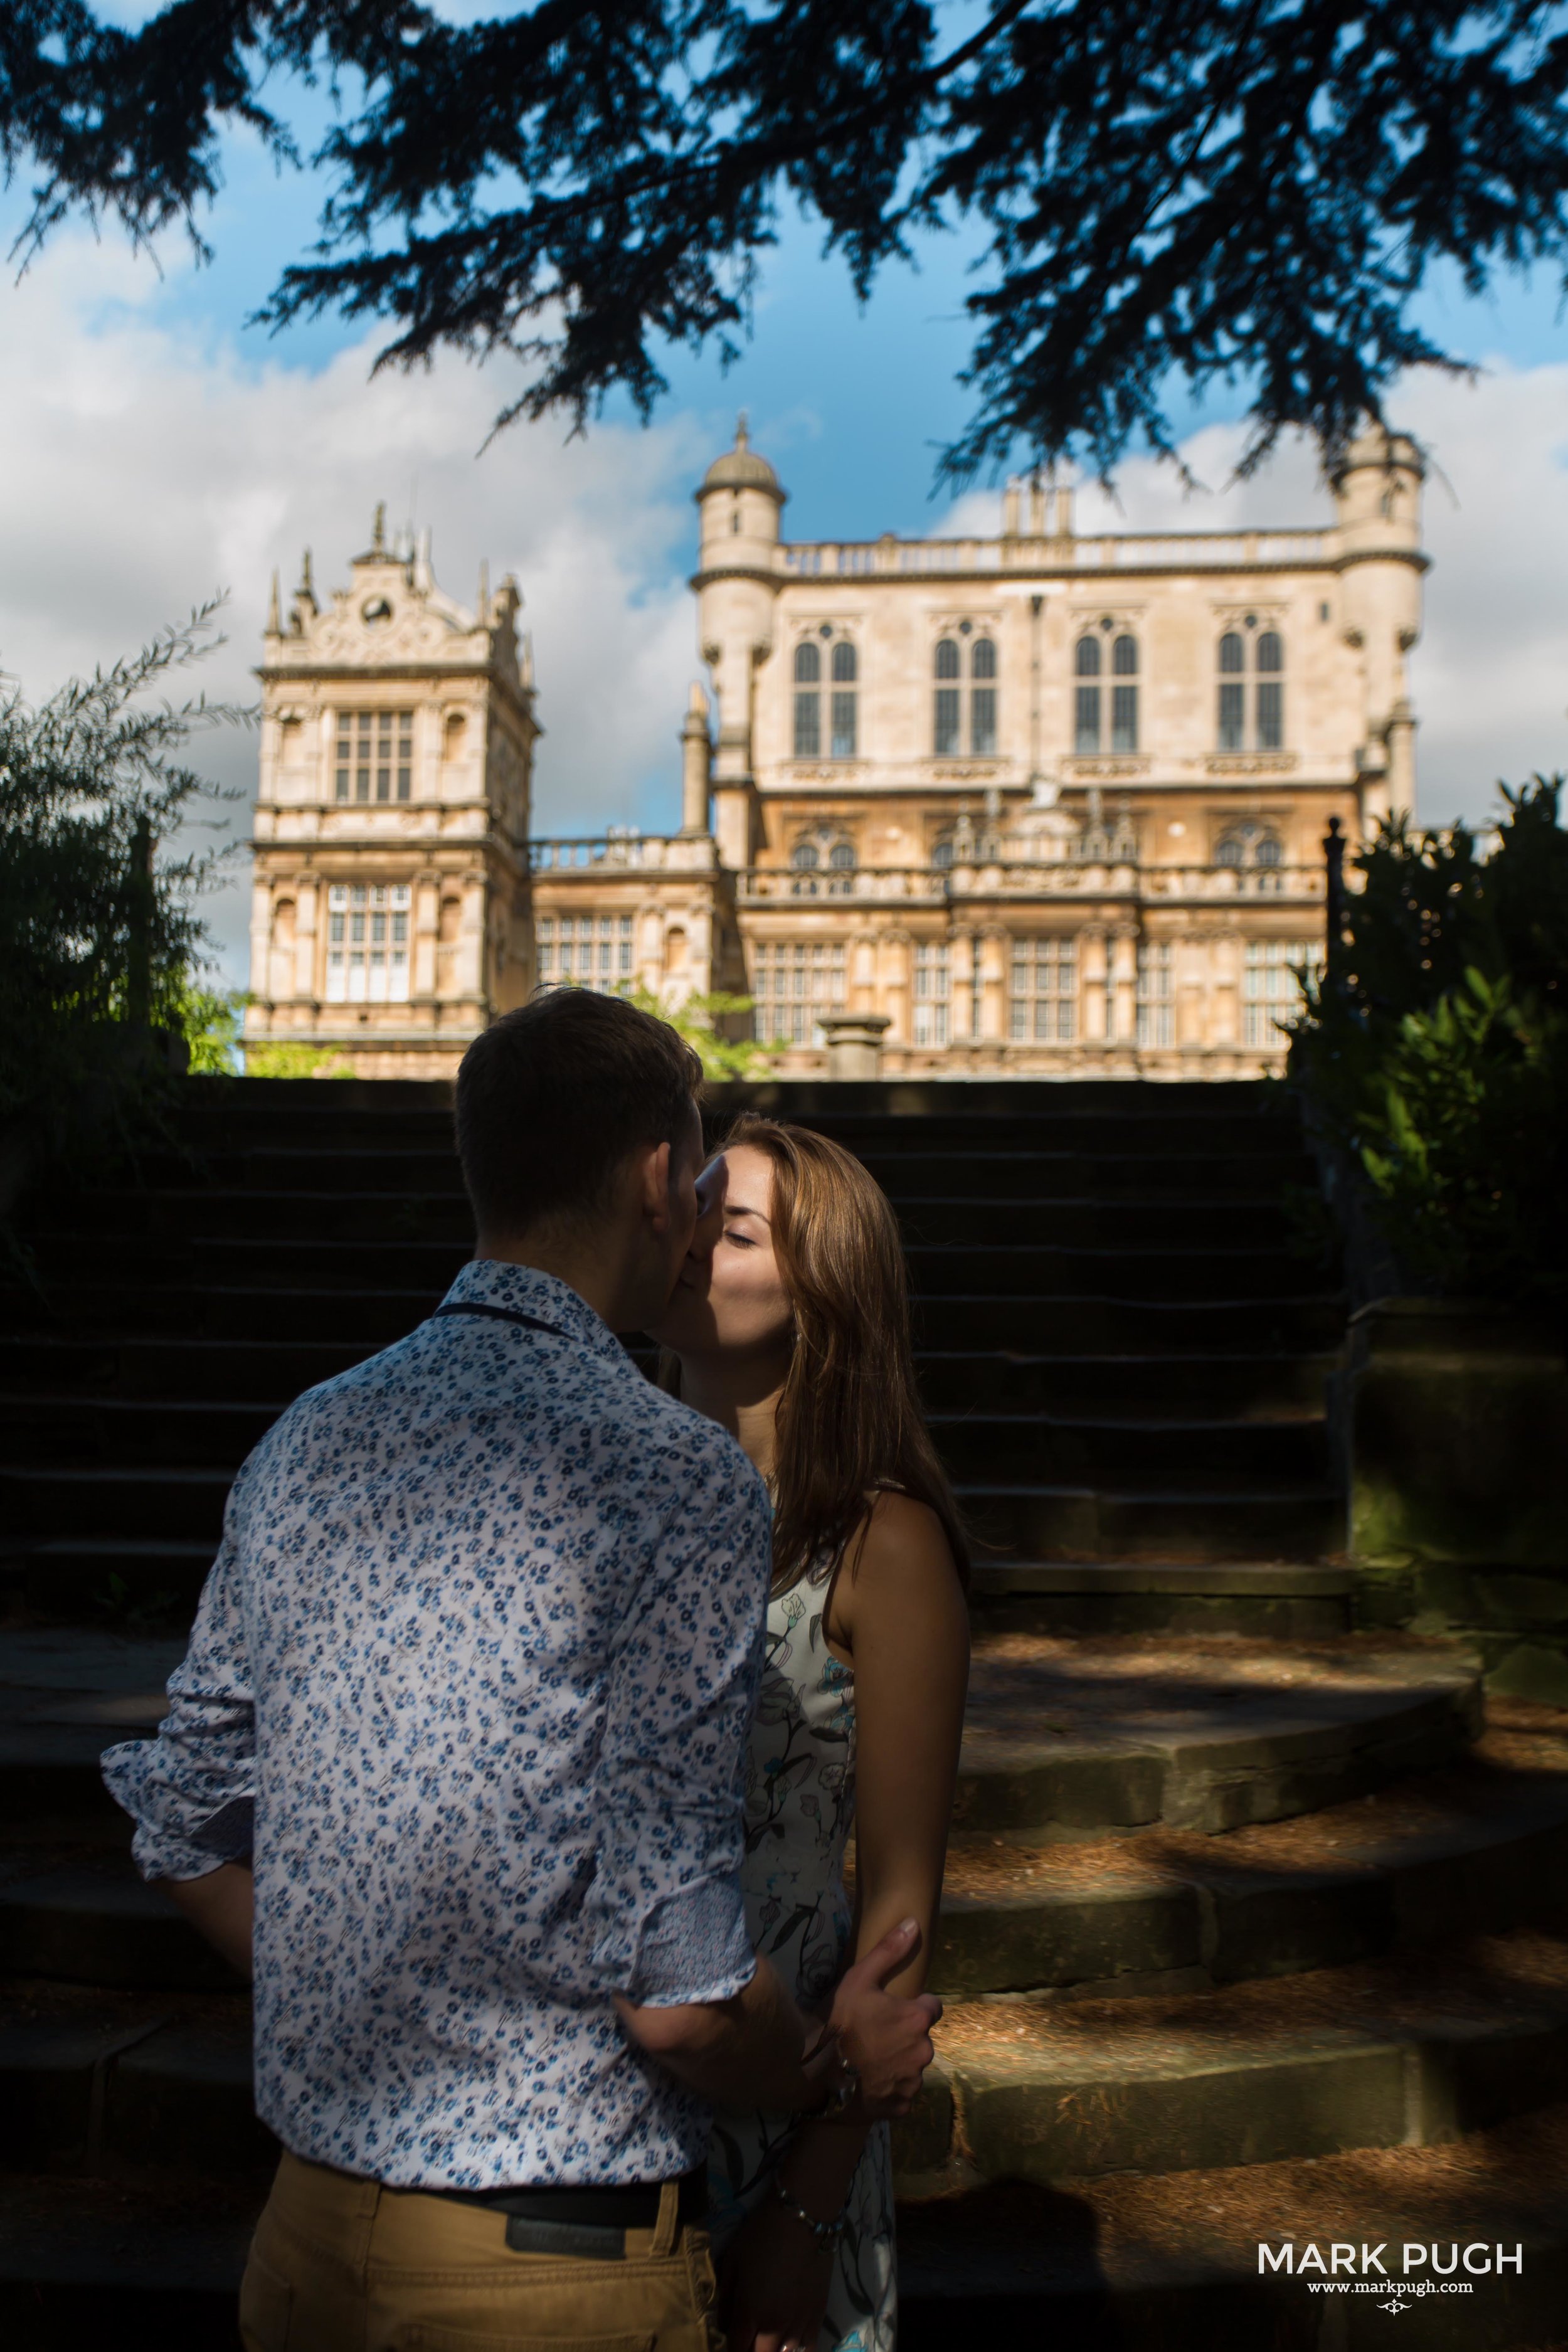 027 - Adriana and James - fineART preWED Photography at Wollaton Hall in Nottingham by www.markpugh.com Mark Pugh of www.mpmedia.co.uk_.JPG